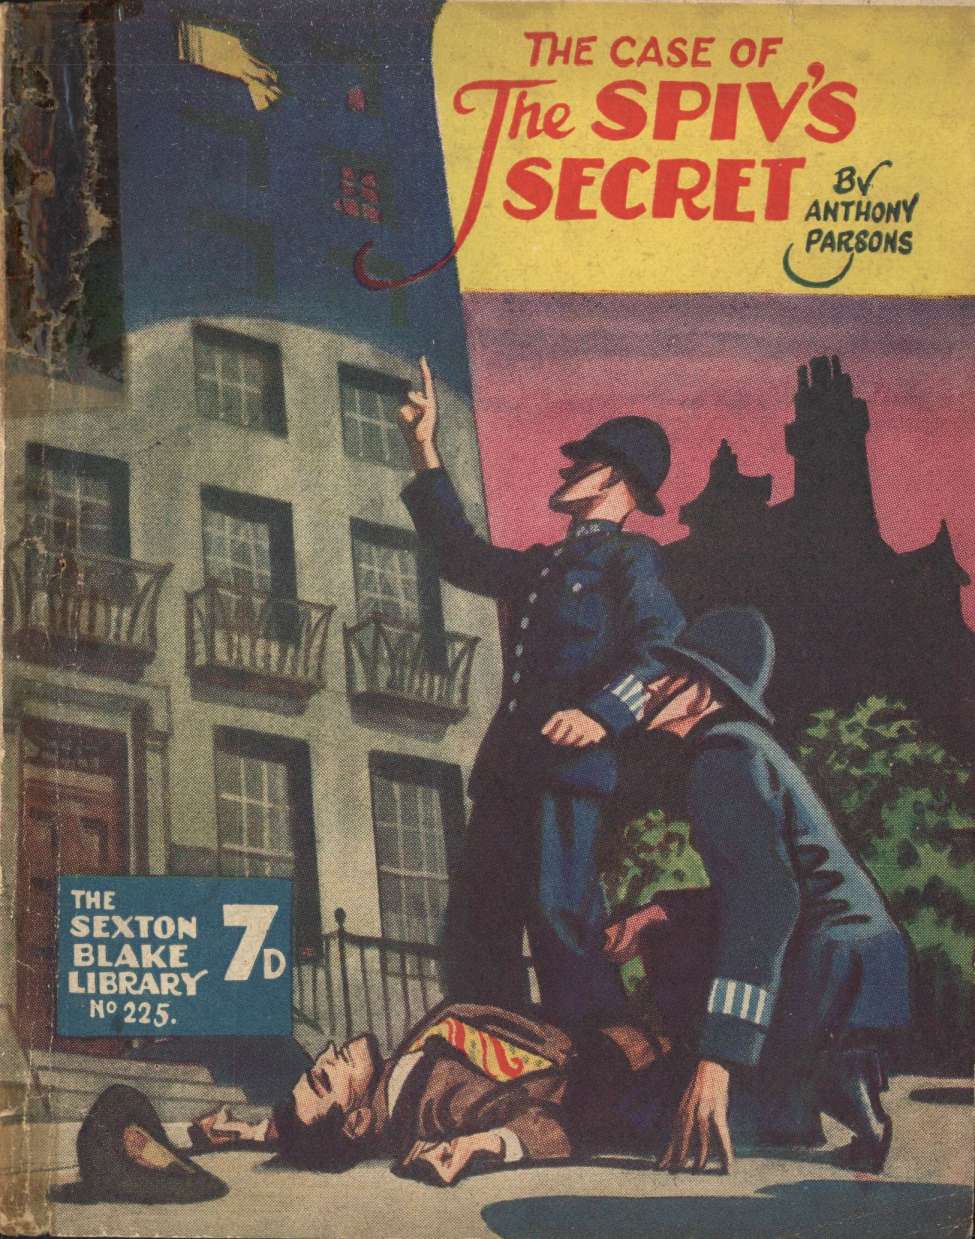 Book Cover For Sexton Blake Library S3 225 - The Case of the Spiv's Secret